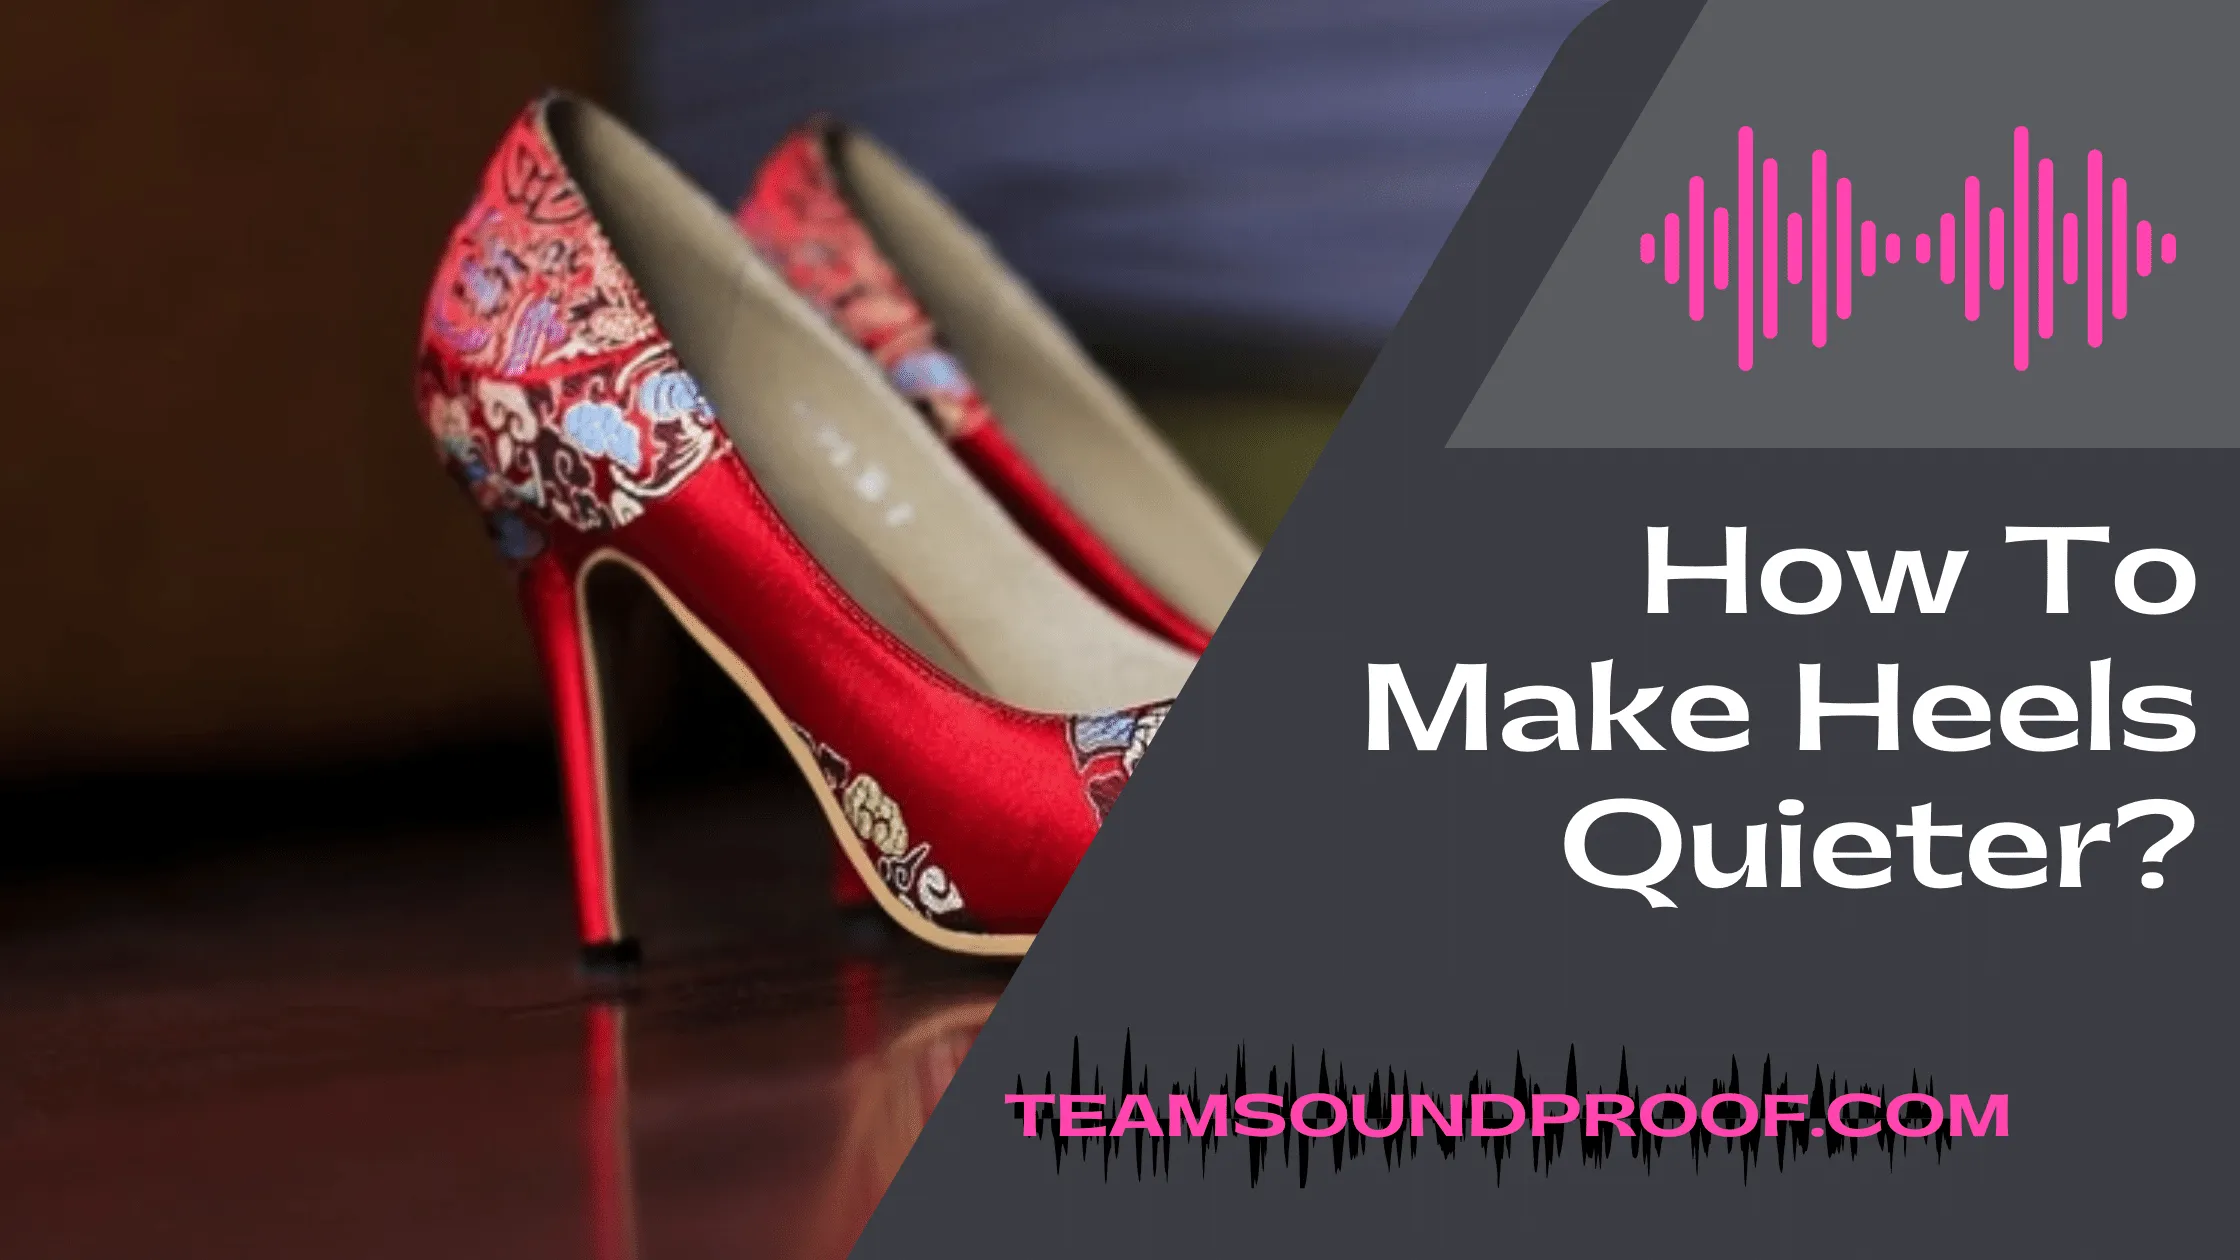 How To Make Heels Quieter? - Recommended Guide